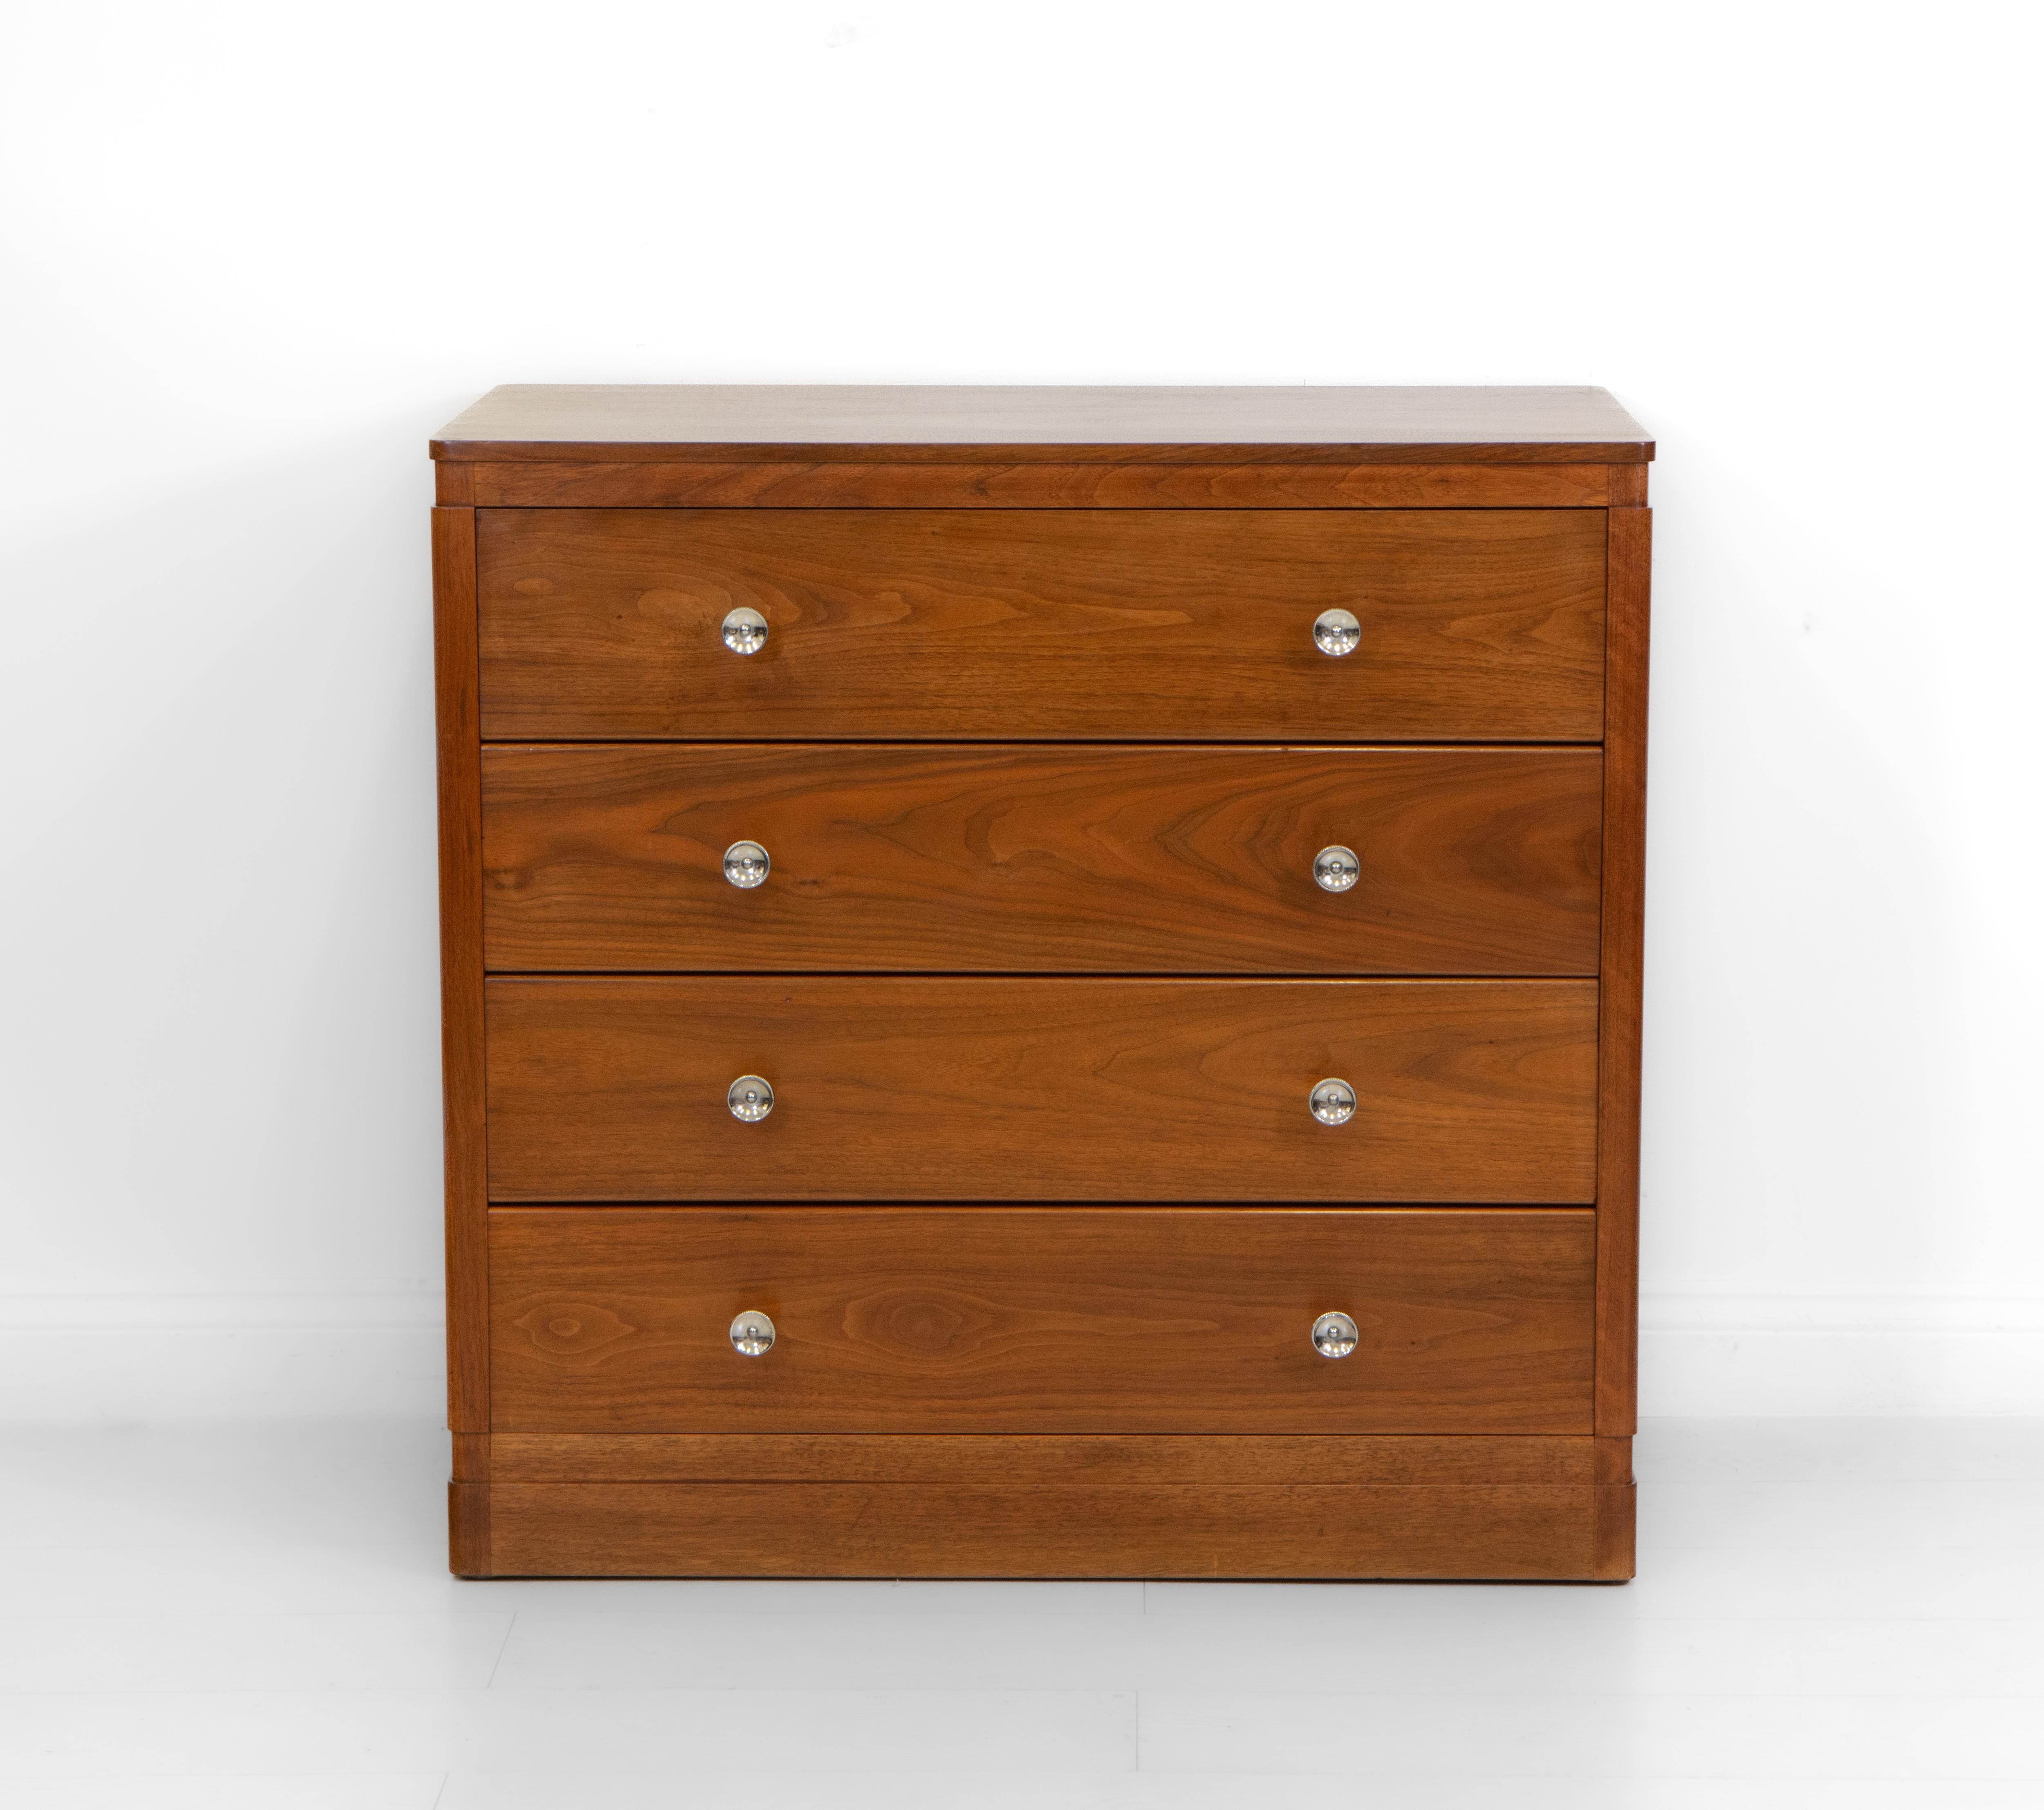 
A Cotswold walnut chest of drawers from the ‘Shipton’ suite, designed by W.H.Russell for Gordon Russell Ltd in 1930. 

Superbly constructed in American black walnut, with chromed handles. Nicely proportioned with simple detail. It has has been